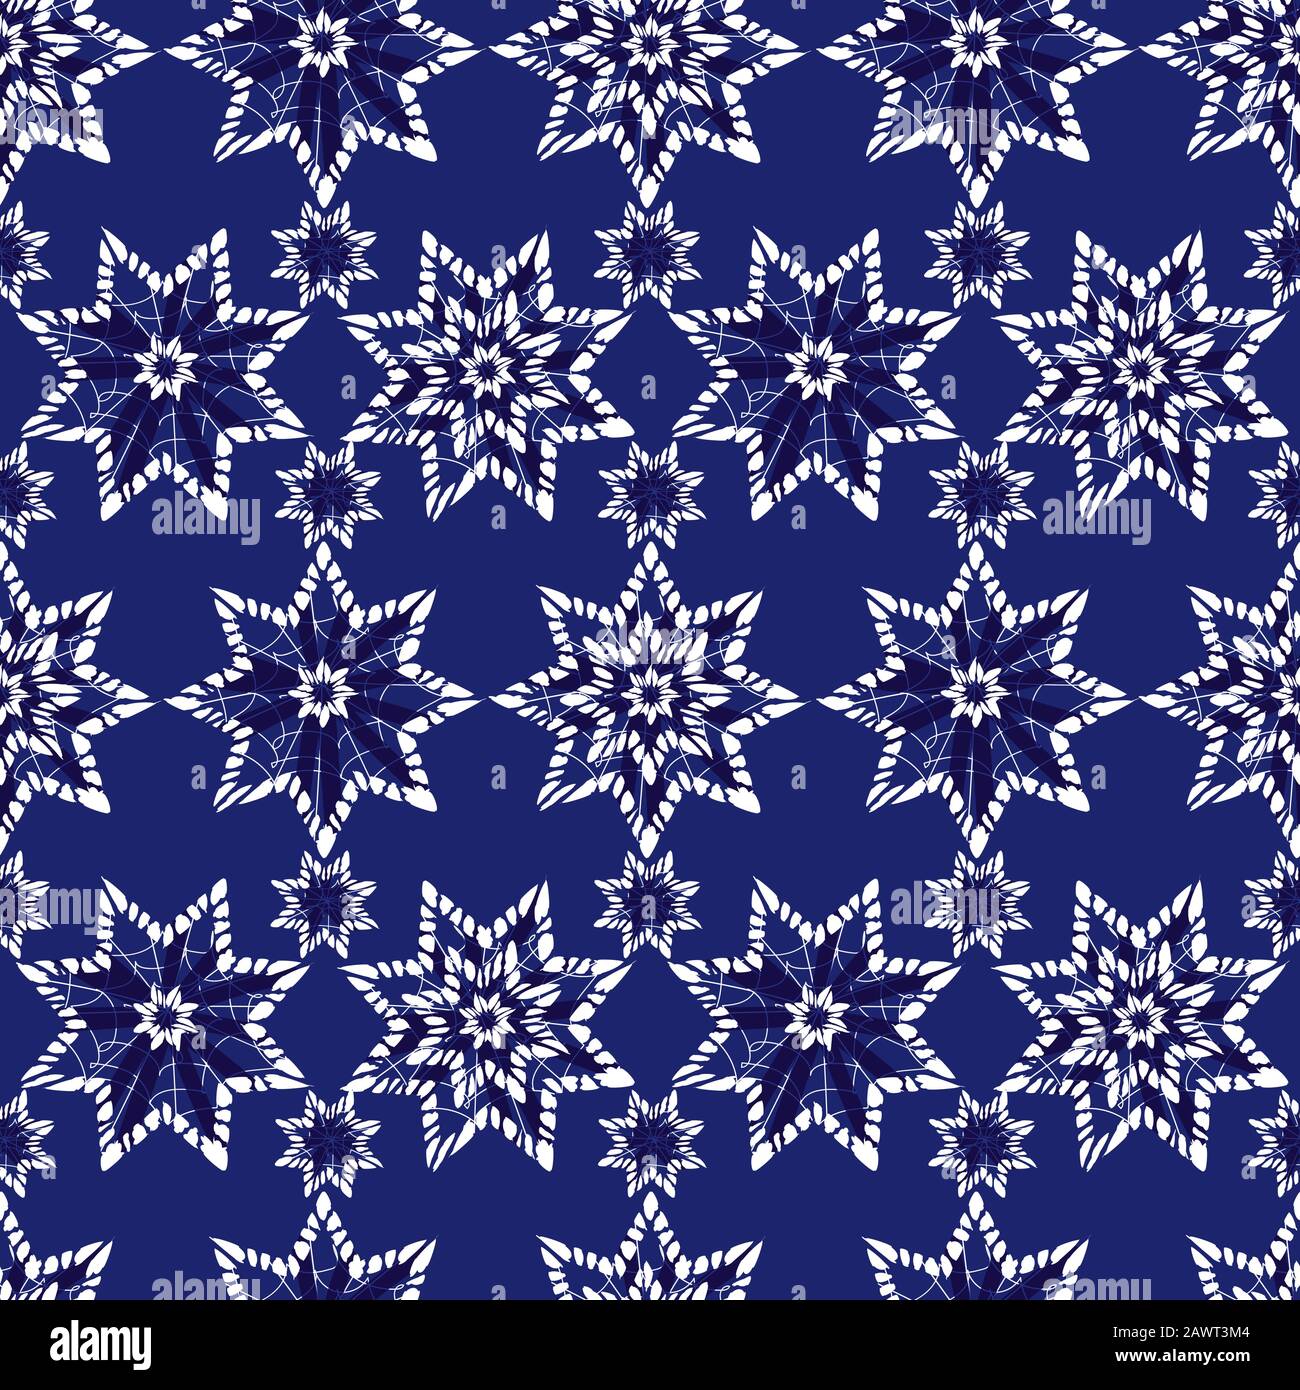 Vector blue abstract snowflake stars seamless background. Suitable for textile, gift wrap and wallpaper. Stock Vector